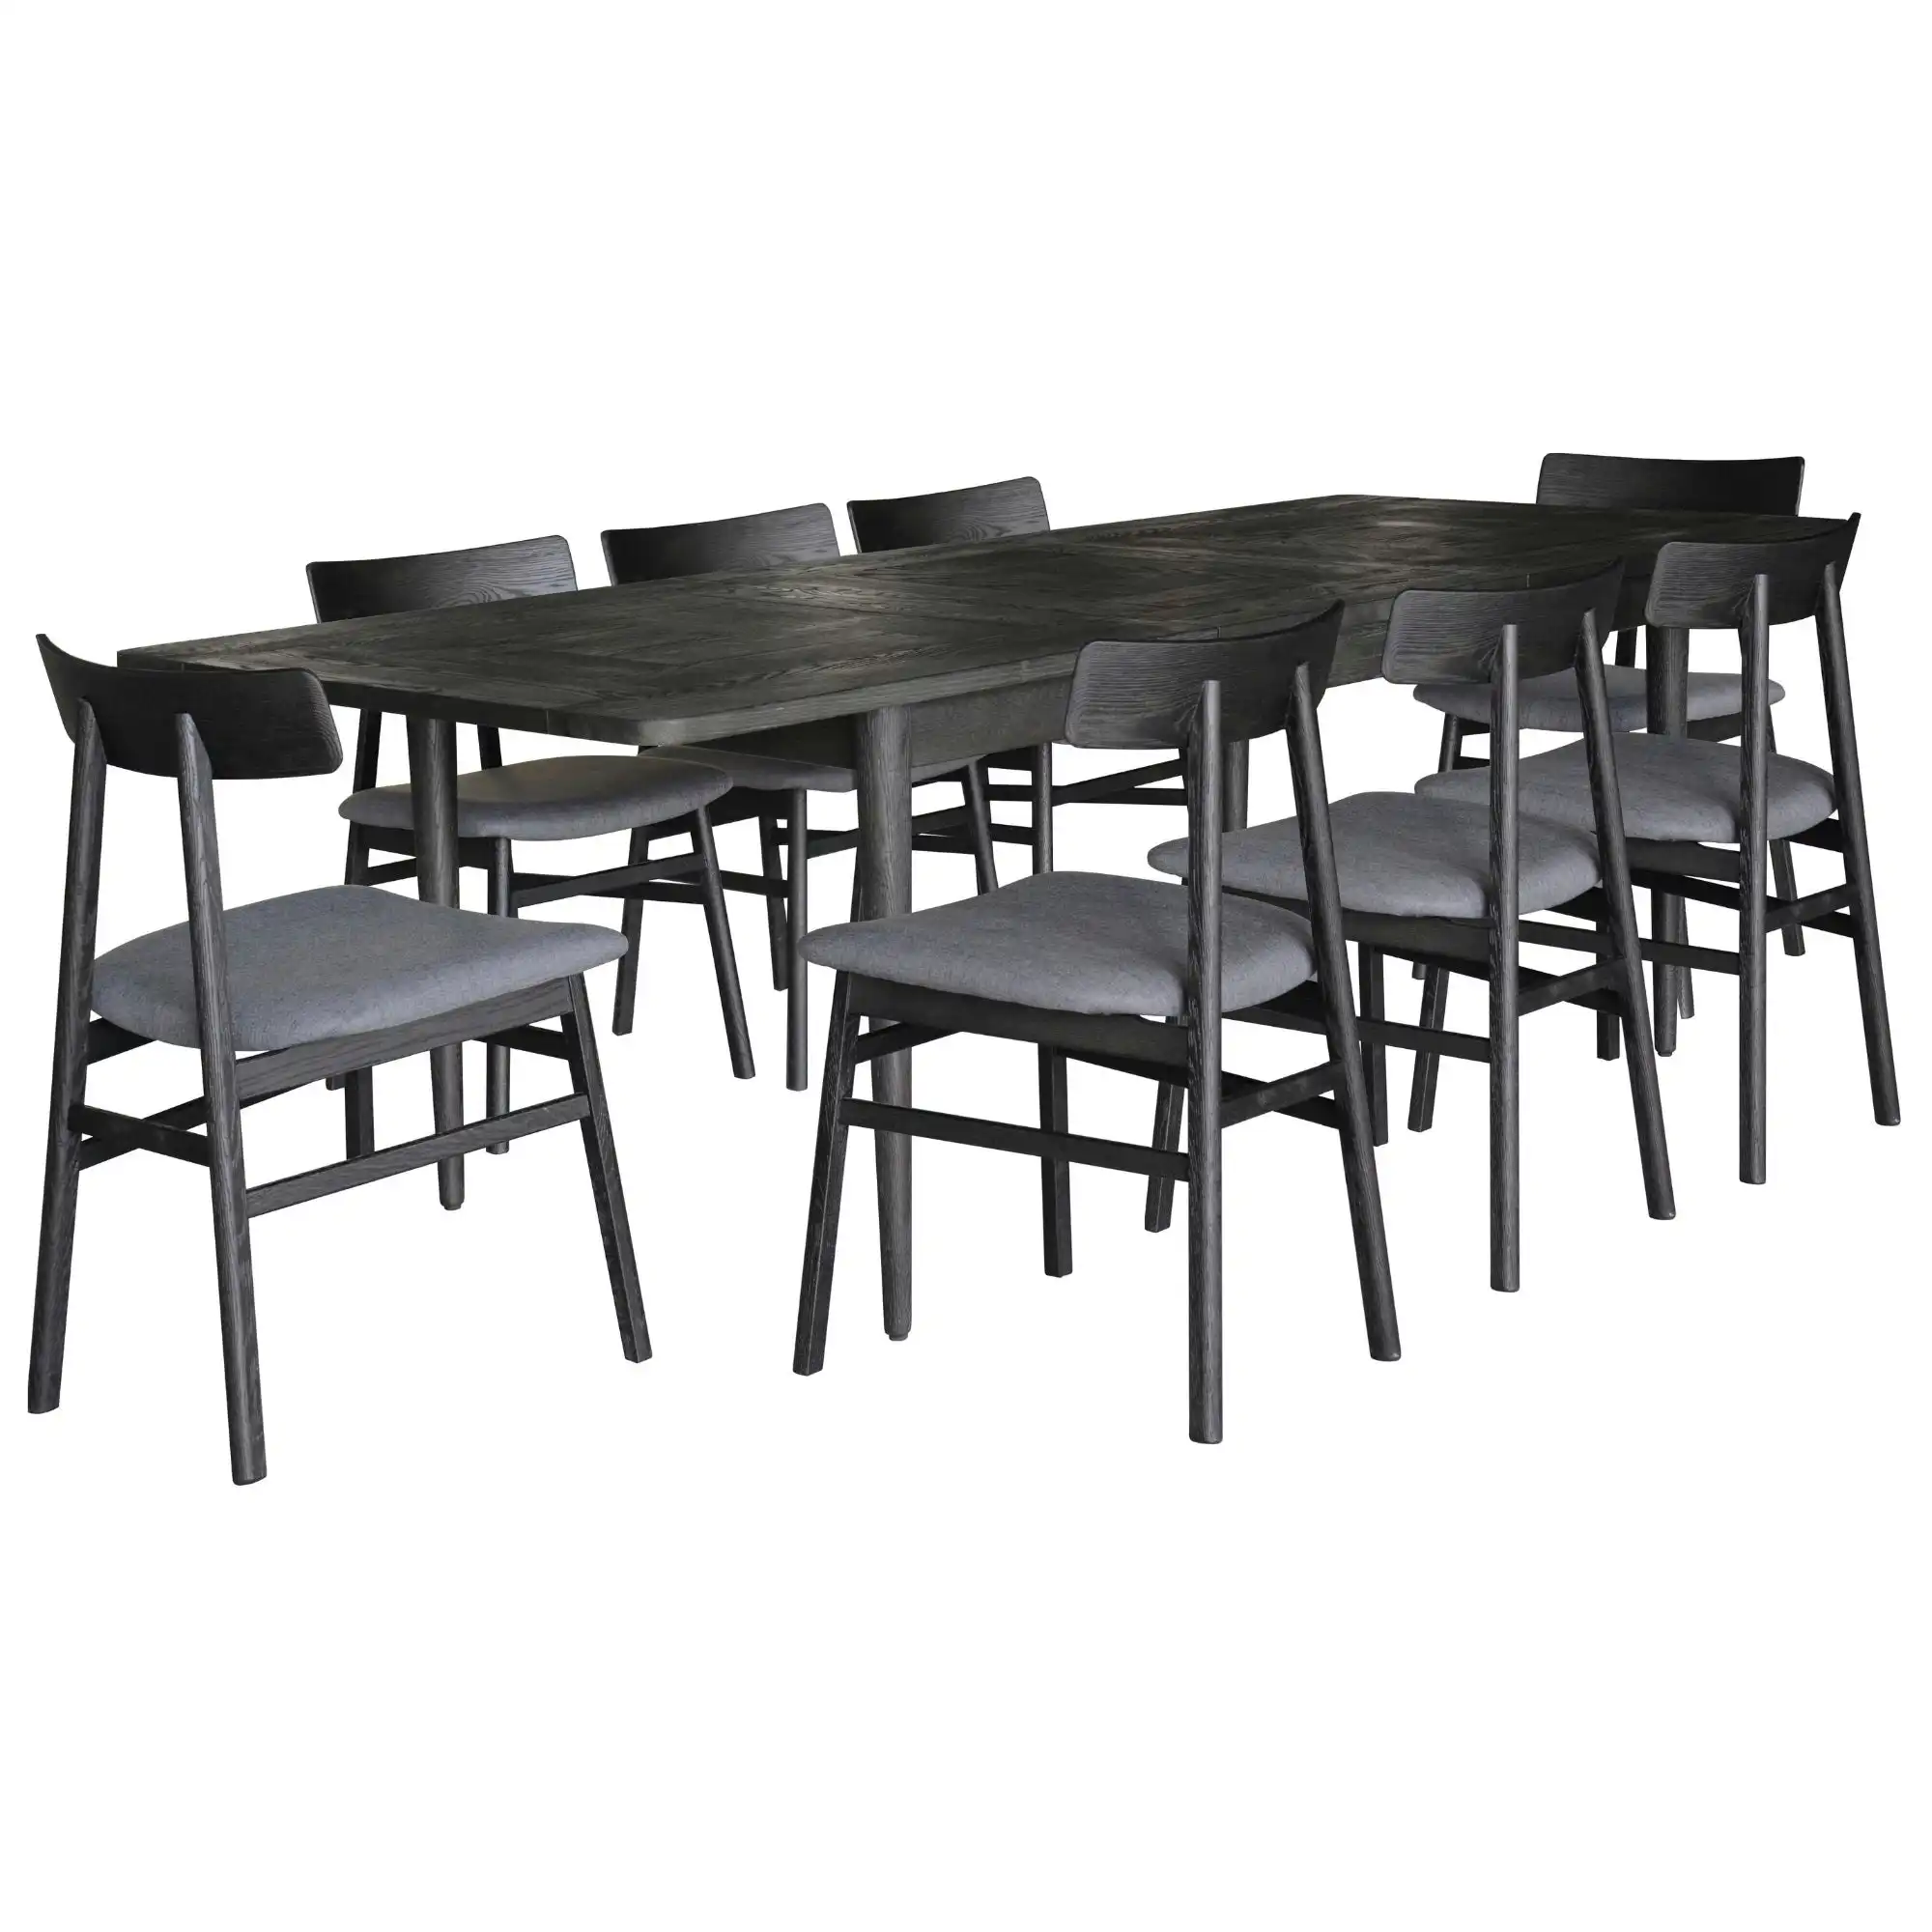 Claire 9pc Extendable Dining Table Fabric Seat Chair Set